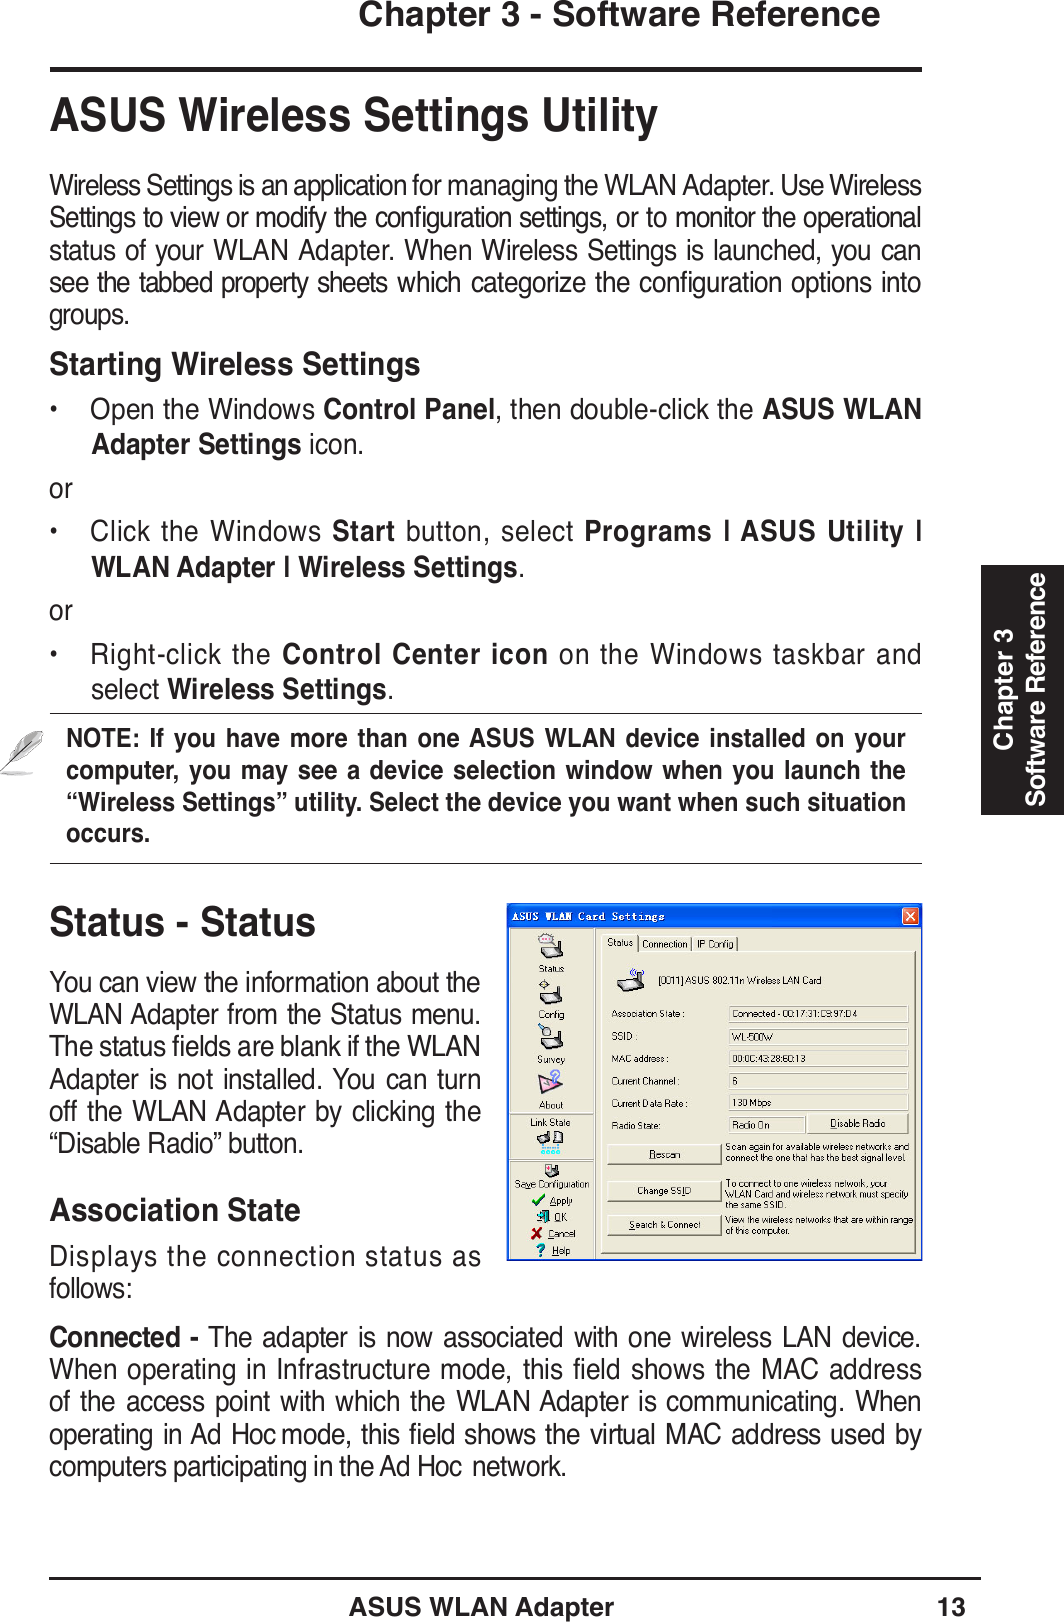 ASUS WLAN Adapter 13Chapter 3 - Software ReferenceChapter 3Software ReferenceStatus - StatusYou can view the information about the WLAN Adapter from the Status menu. 7KHVWDWXVÀHOGVDUHEODQNLIWKH:/$1Adapter is not installed. You can turn off the WLAN Adapter by clicking the “Disable Radio” button.Association StateDisplays the connection status as follows:Connected - The adapter is now associated with one wireless LAN device. When operating in Infrastructure mode, this field shows the MAC address of the access point with which the WLAN Adapter is communicating. When operating in Ad Hoc PRGHWKLV ÀHOGVKRZV WKHYLUWXDO 0$&amp;DGGUHVV XVHGE\computers participating in the Ad Hoc  network. ASUS Wireless Settings UtilityWireless Settings is an application for managing the WLAN Adapter. Use Wireless 6HWWLQJVWRYLHZRUPRGLI\WKHFRQÀJXUDWLRQVHWWLQJVRUWRPRQLWRUWKHRSHUDWLRQDOstatus of your WLAN Adapter. When Wireless Settings is launched, you can VHHWKHWDEEHGSURSHUW\VKHHWV ZKLFKFDWHJRUL]HWKHFRQÀJXUDWLRQRSWLRQVLQWRgroups.Starting Wireless Settings• Open the Windows Control Panel, then double-click the ASUS WLANAdapter Settings icon.or• Click the Windows Start button, select Programs | ASUS Utility | WLAN Adapter | Wireless Settings.or• Right-click the Control Center icon on the Windows taskbar and select Wireless Settings.NOTE: If you have more than one ASUS WLAN device installed on your computer, you may see a device selection window when you launch the “Wireless Settings” utility. Select the device you want when such situation occurs.